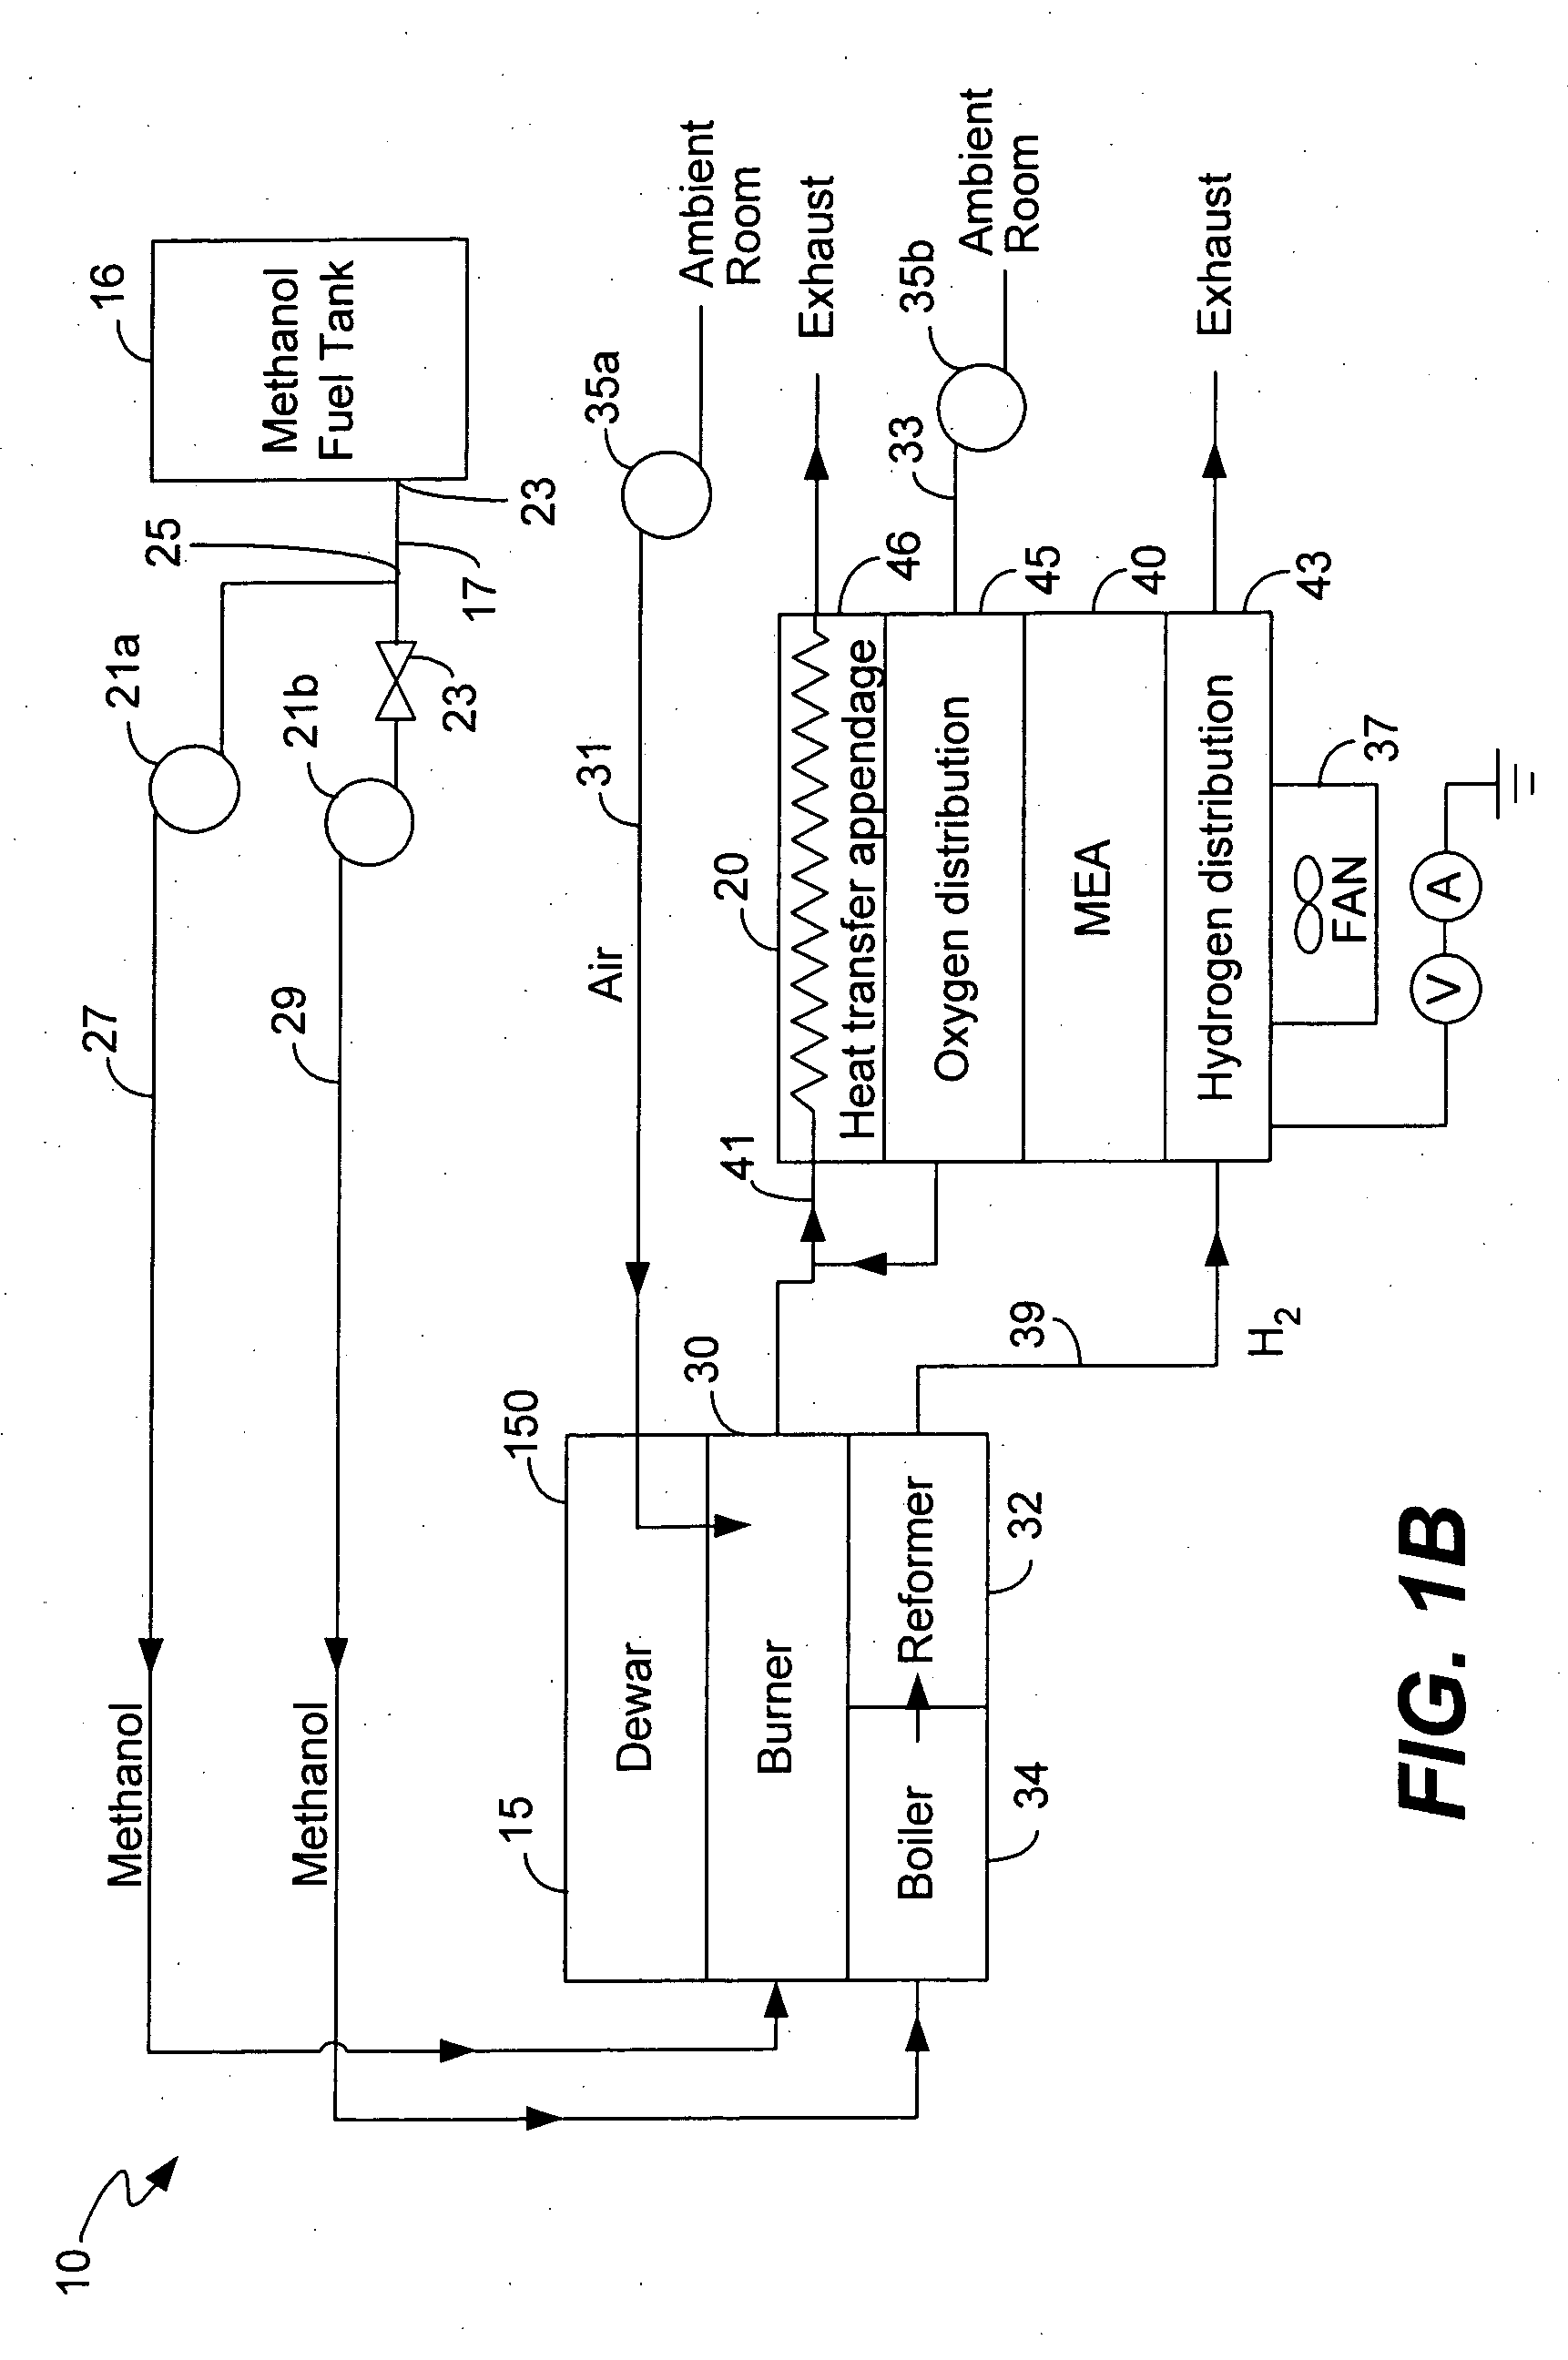 Annular fuel processor and methods